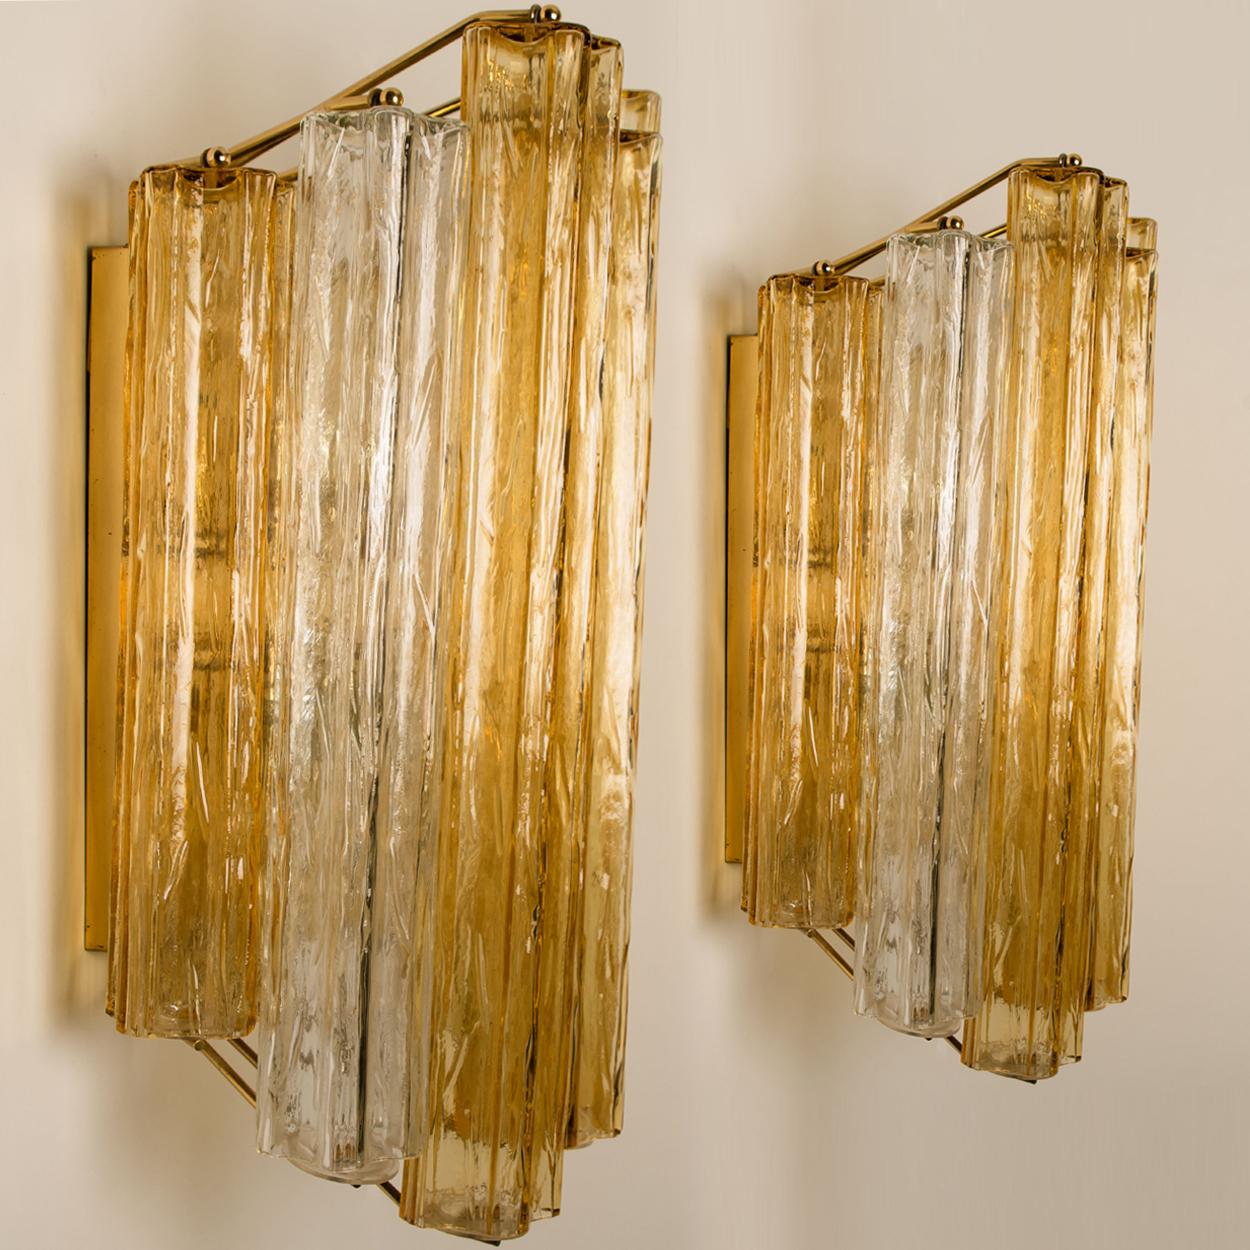 1 of the 2 Extra Large Wall Sconces or Wall Lights Murano Glass, Barovier & Toso 1